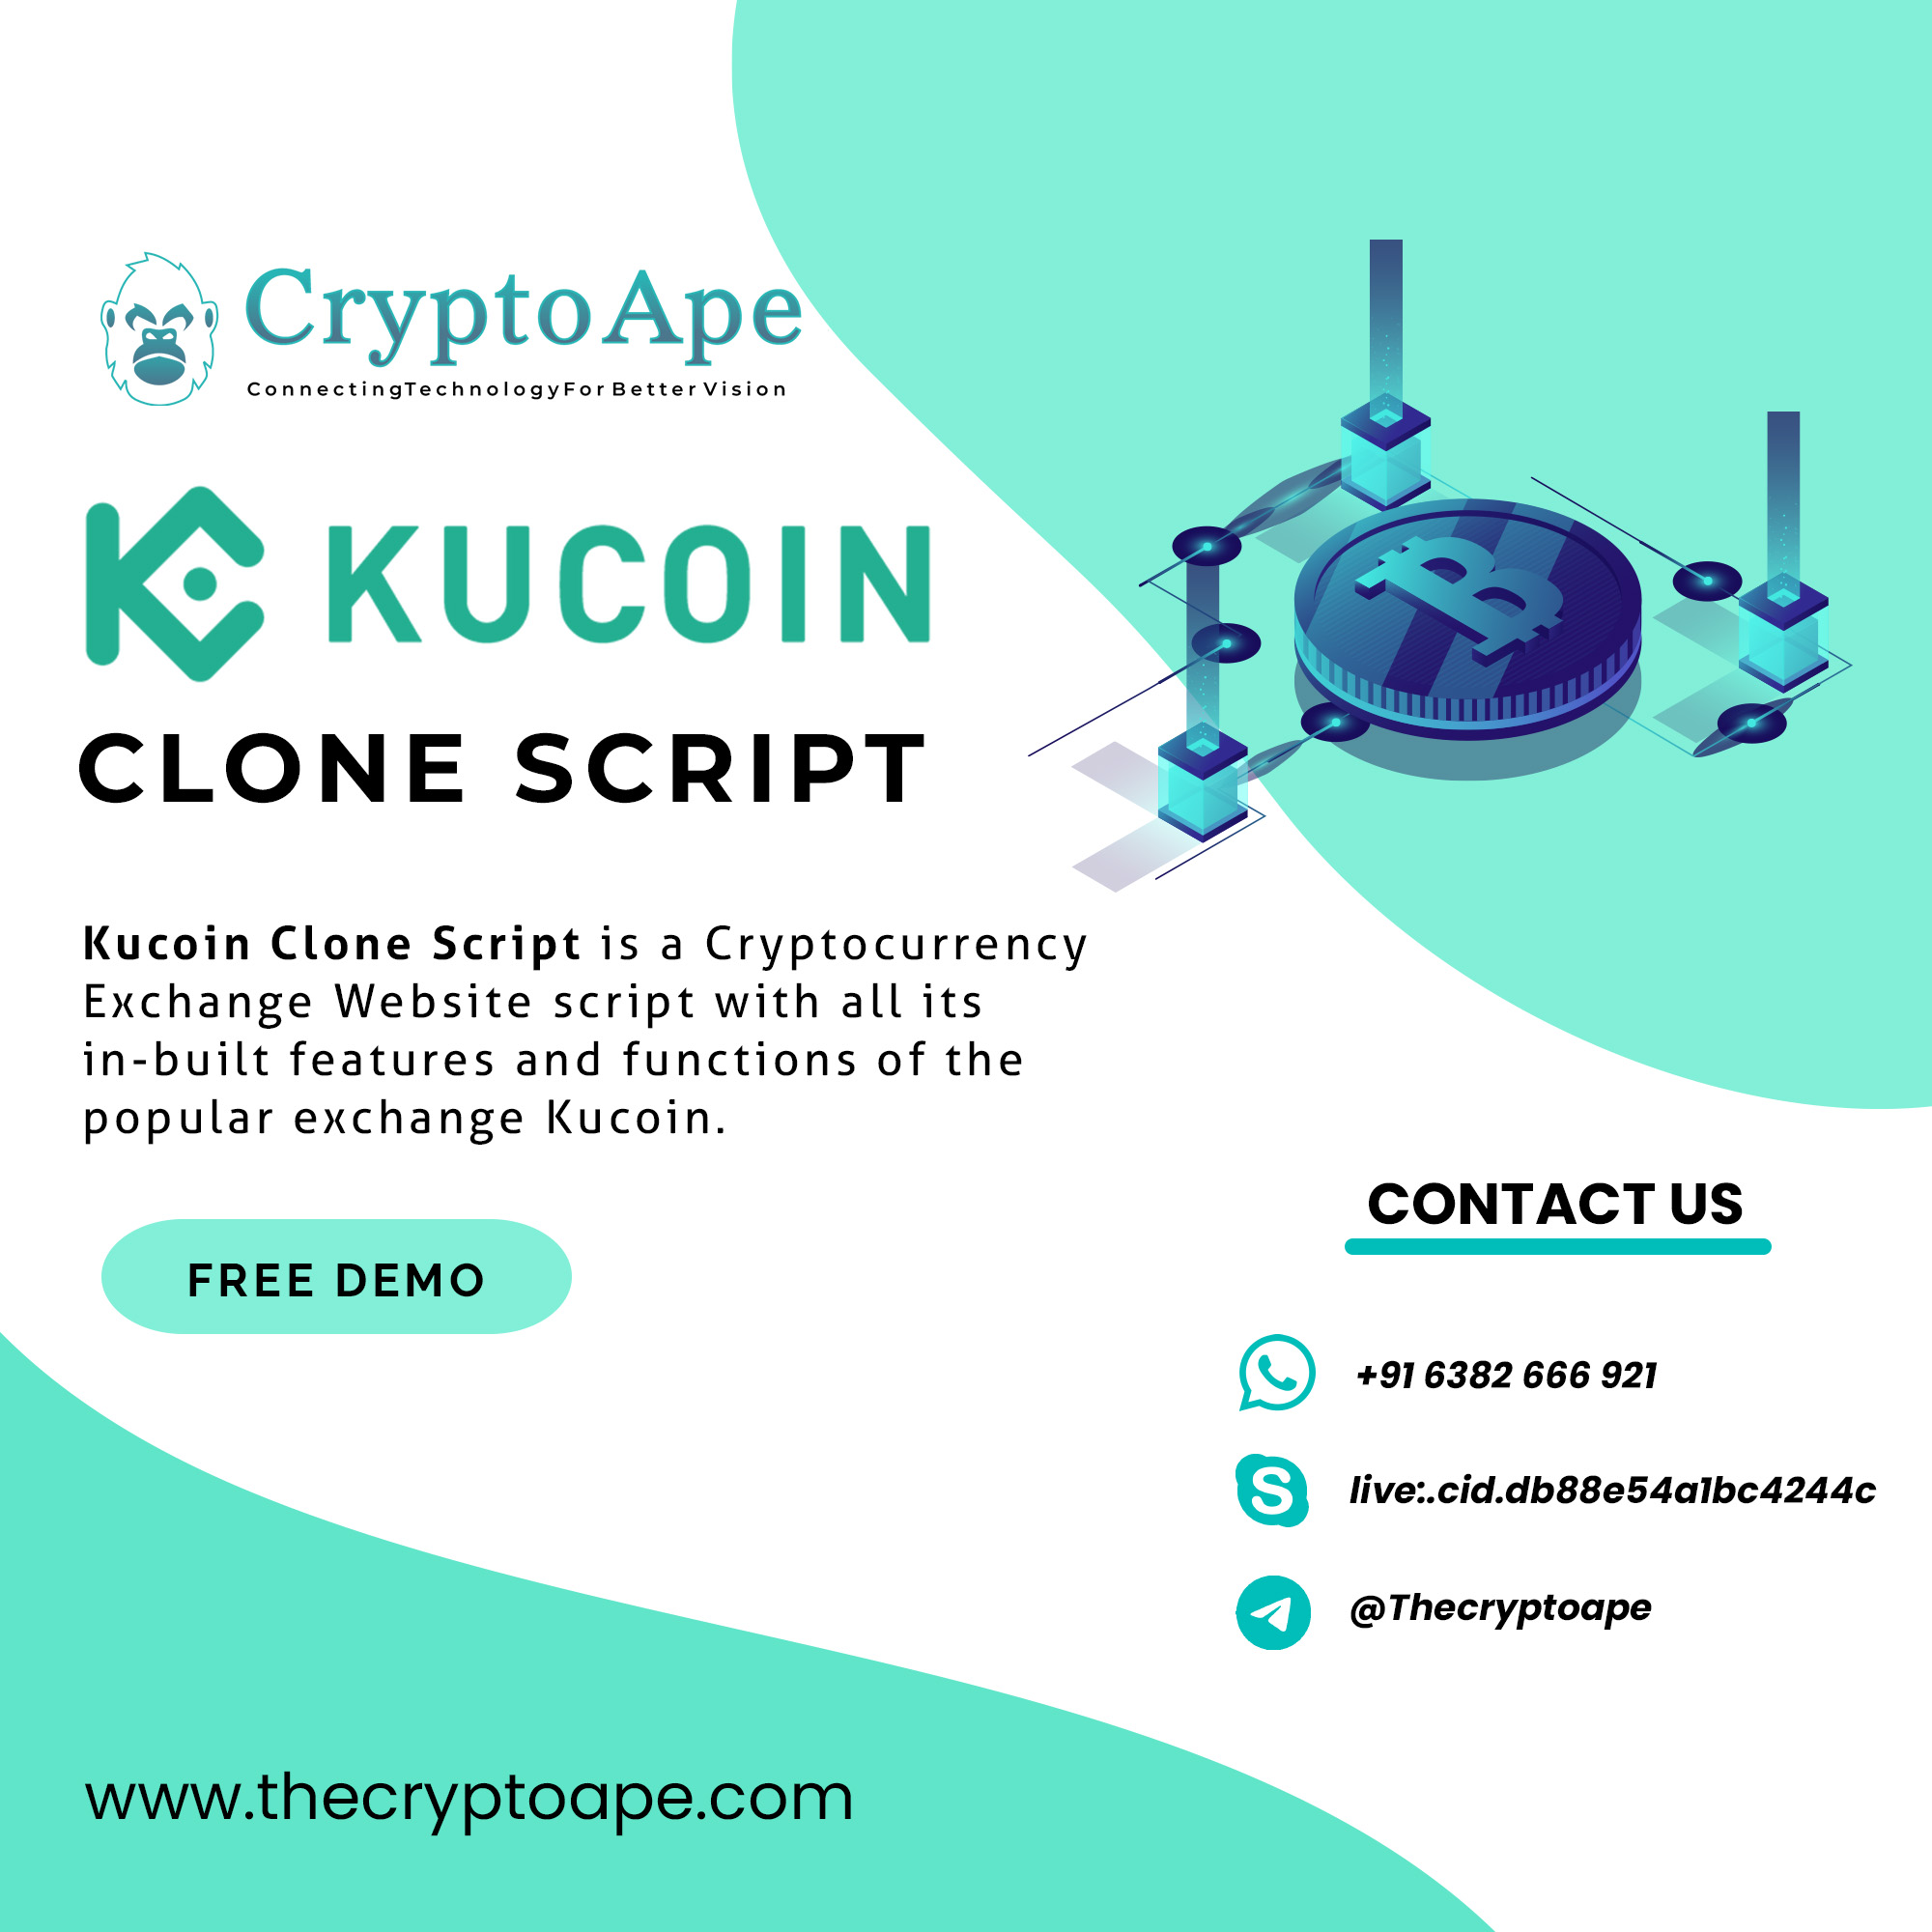 ®) CryptoApe

W ConnectingTechnologyForBetter Vision

- .
IK KUCOIN IE
CLONE SCRIPT ~~ &amp; =

Kucoin Clone Script is a Cryptocurrency
Exchange Website script with all its
in-built features and functions of the
popular exchange Kucoin.

CONTACT US
FREE DEMO

© +91 6382 666 921

oS live:.cid.db88e54albc4244c

oO @Thecryptoape

www.thecryptoape.com